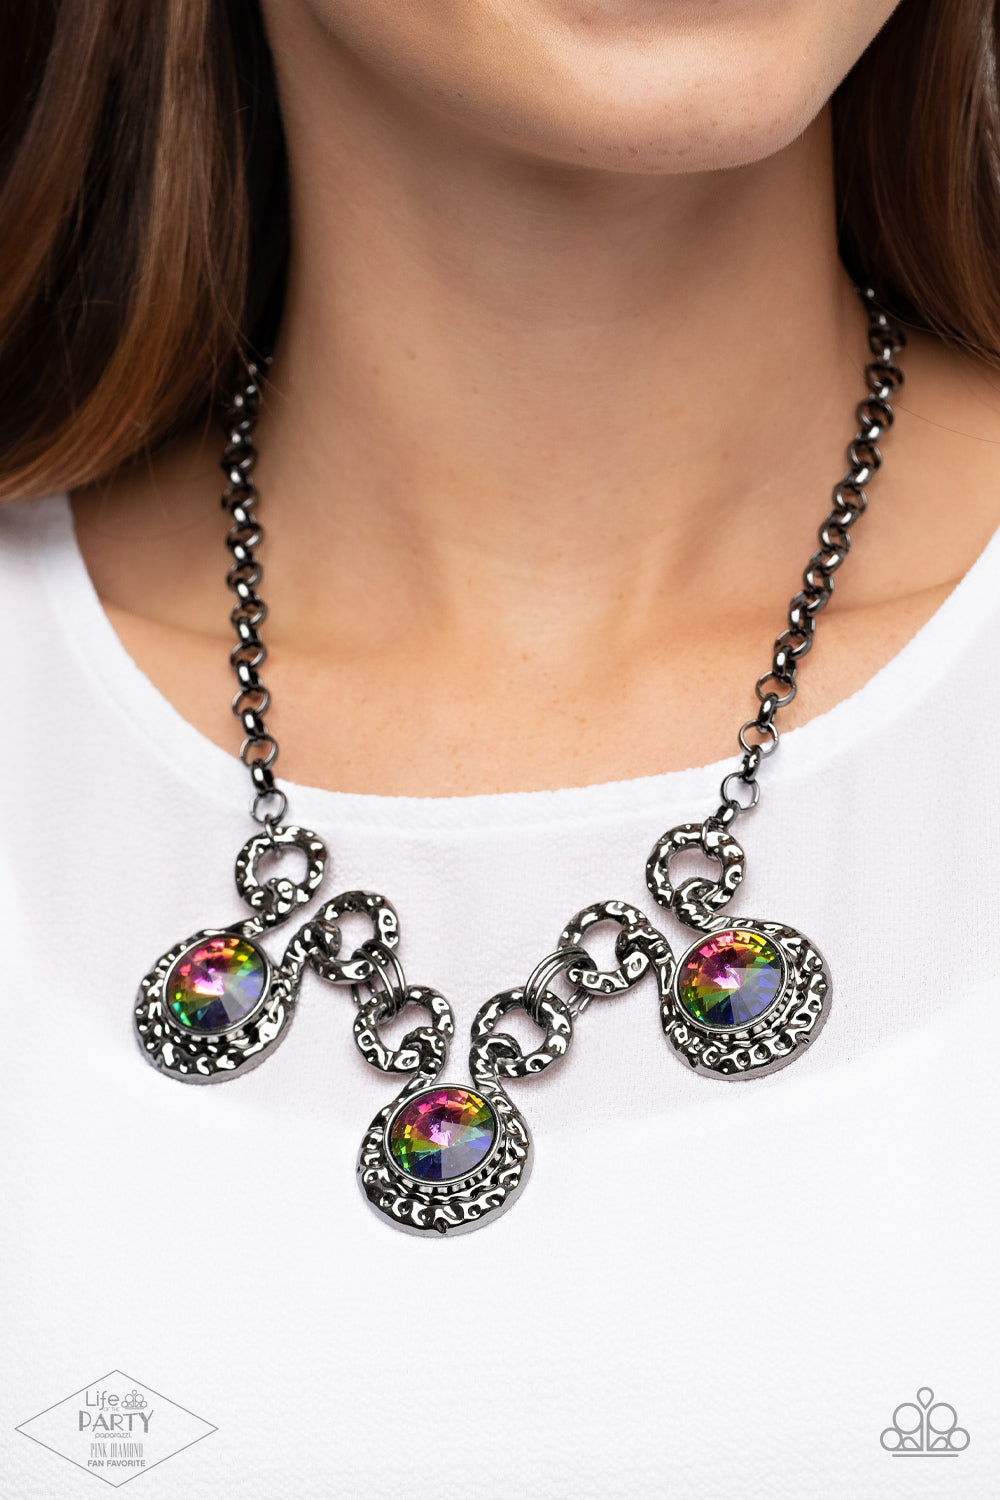 Paparazzi Accessories: Hypnotized - Multi Oil Spill Necklace - 2021 Life of the Party